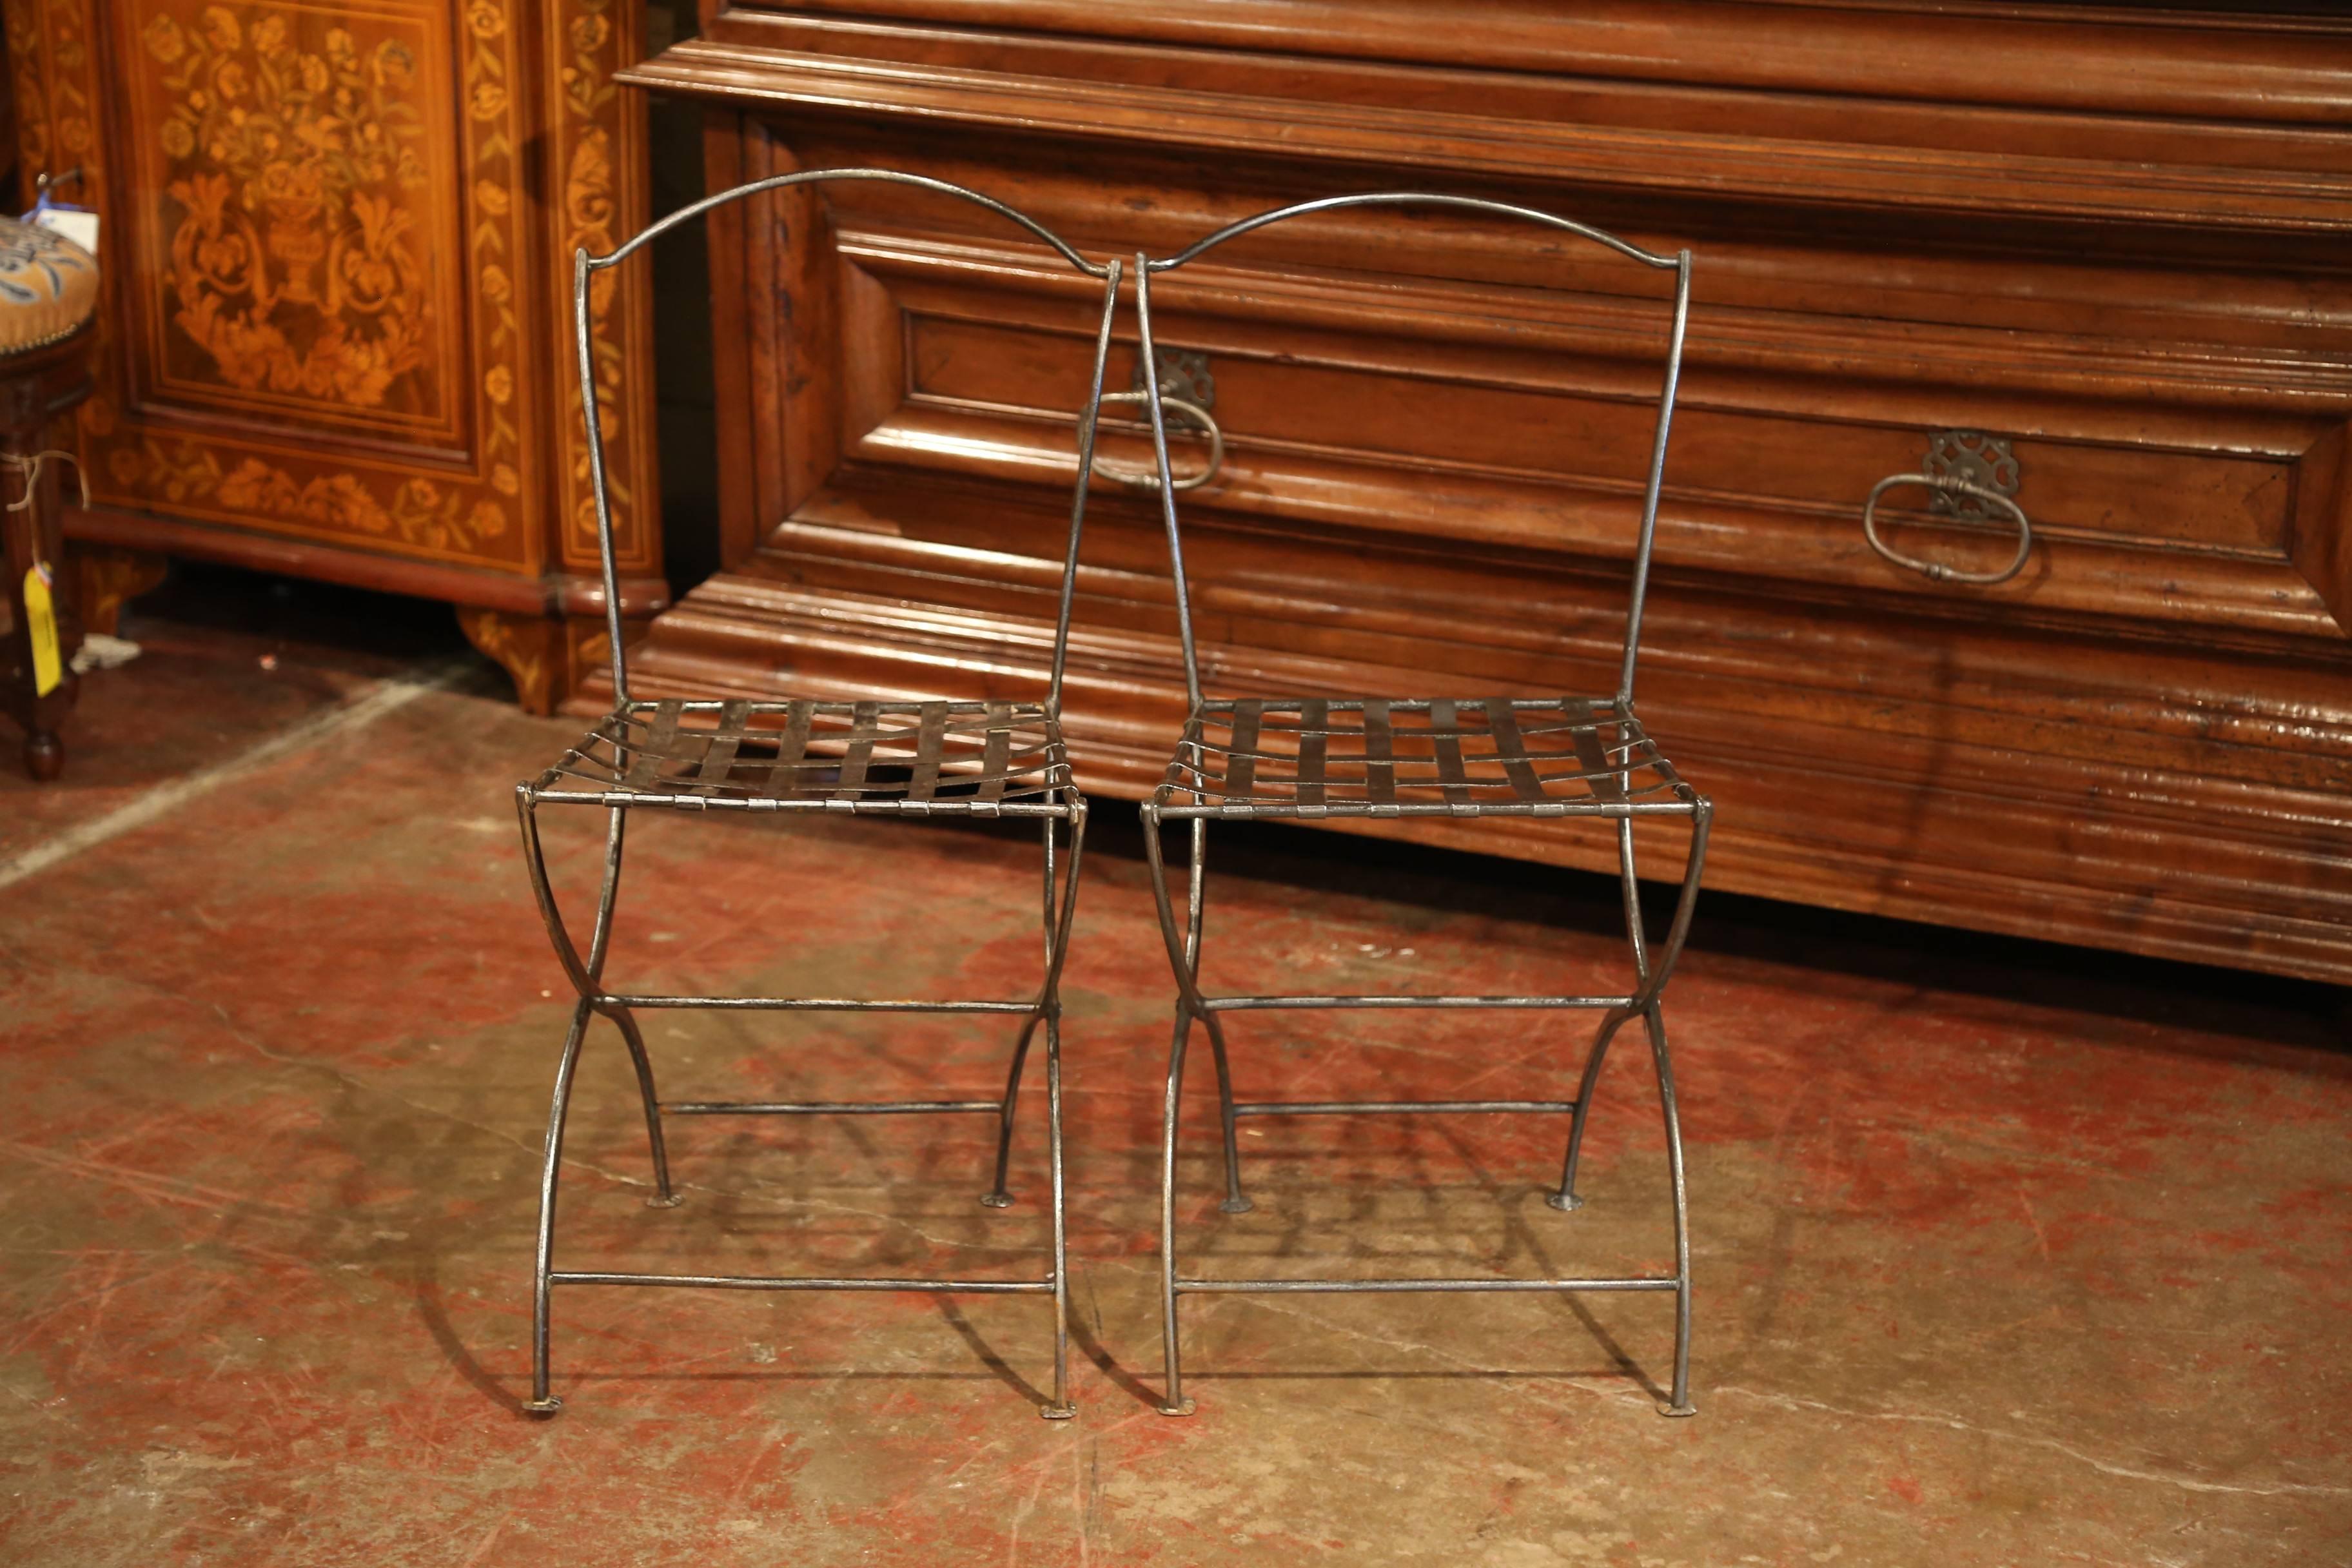 Place this pair of antique side chairs around a bistrot table on a covered patio. Forged in France circa 1880, the iron chairs have an arched back, curved legs and a woven metal seat. The simple, slim chairs are in excellent condition, a rich